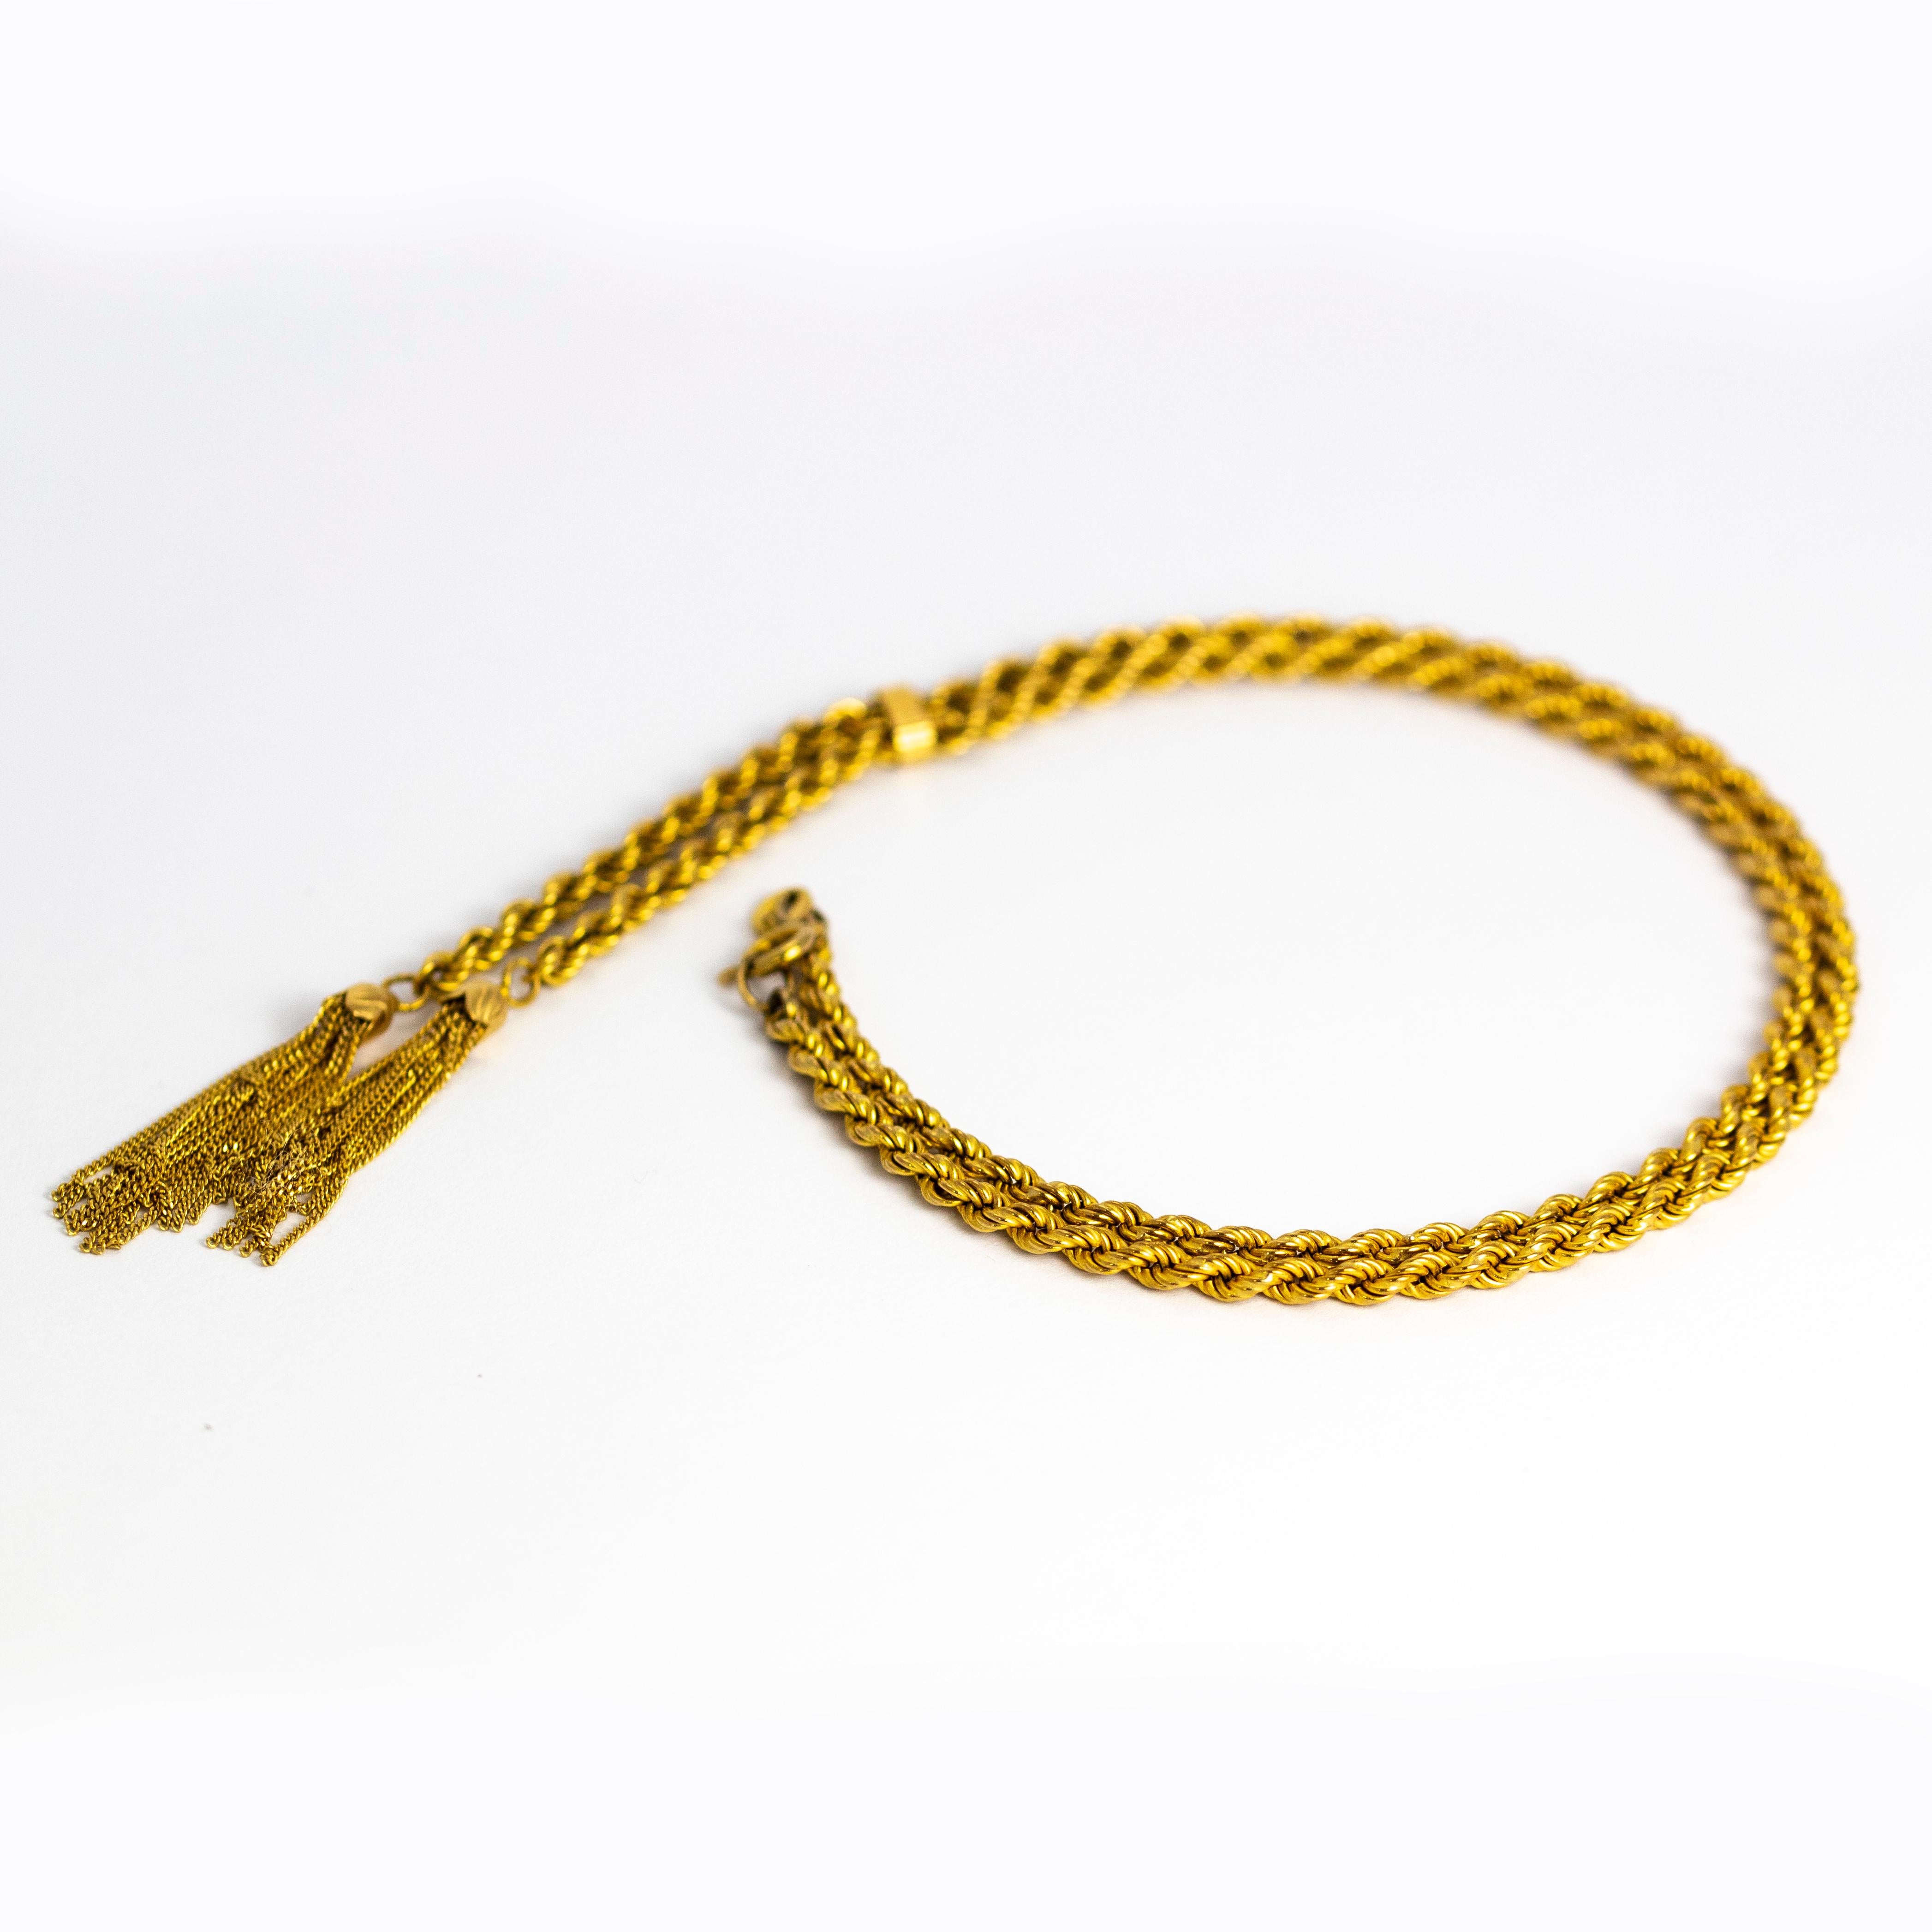 This stylish late Victorian necklace has two delicate tassels which hang on the end of a stunning rope twist chain. The tassels are made up of tiny glistening chains held by gold bells. All modelled in 9ct gold. 

Length: 16inches